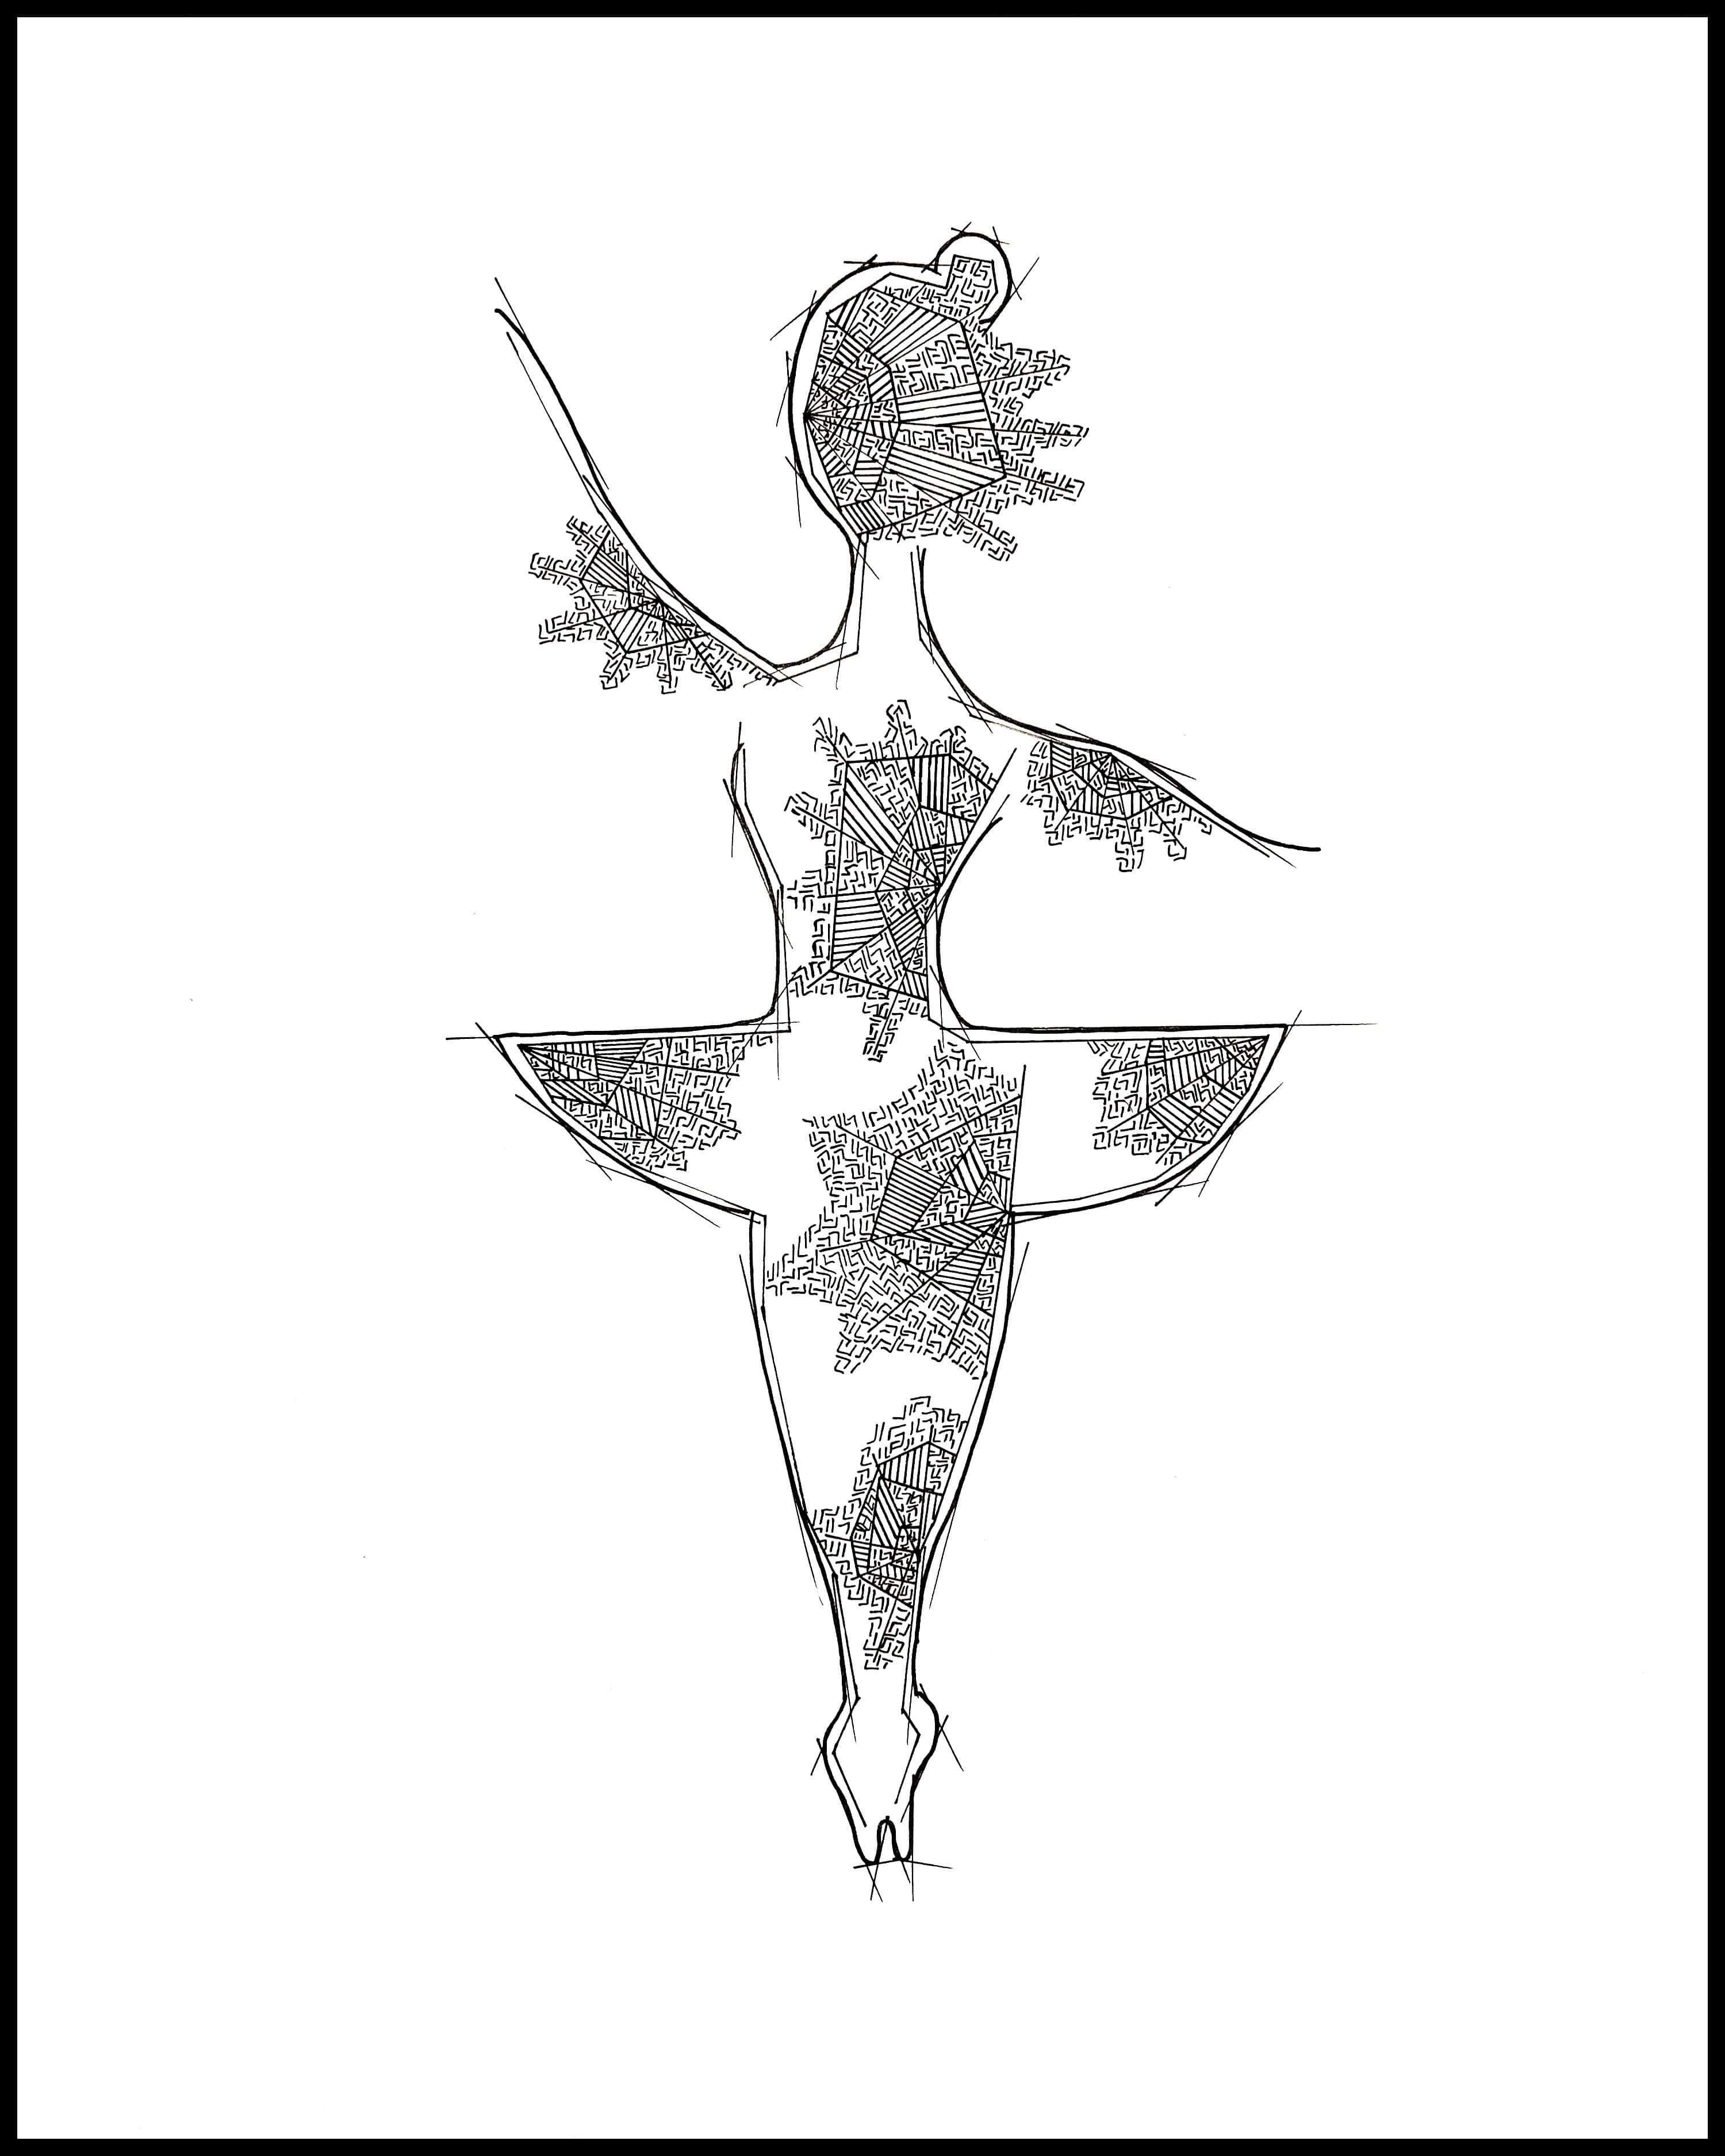 dianesegard ladanseuse dessin abstrait theartcycle photo_principale.jpg The Art Cycle